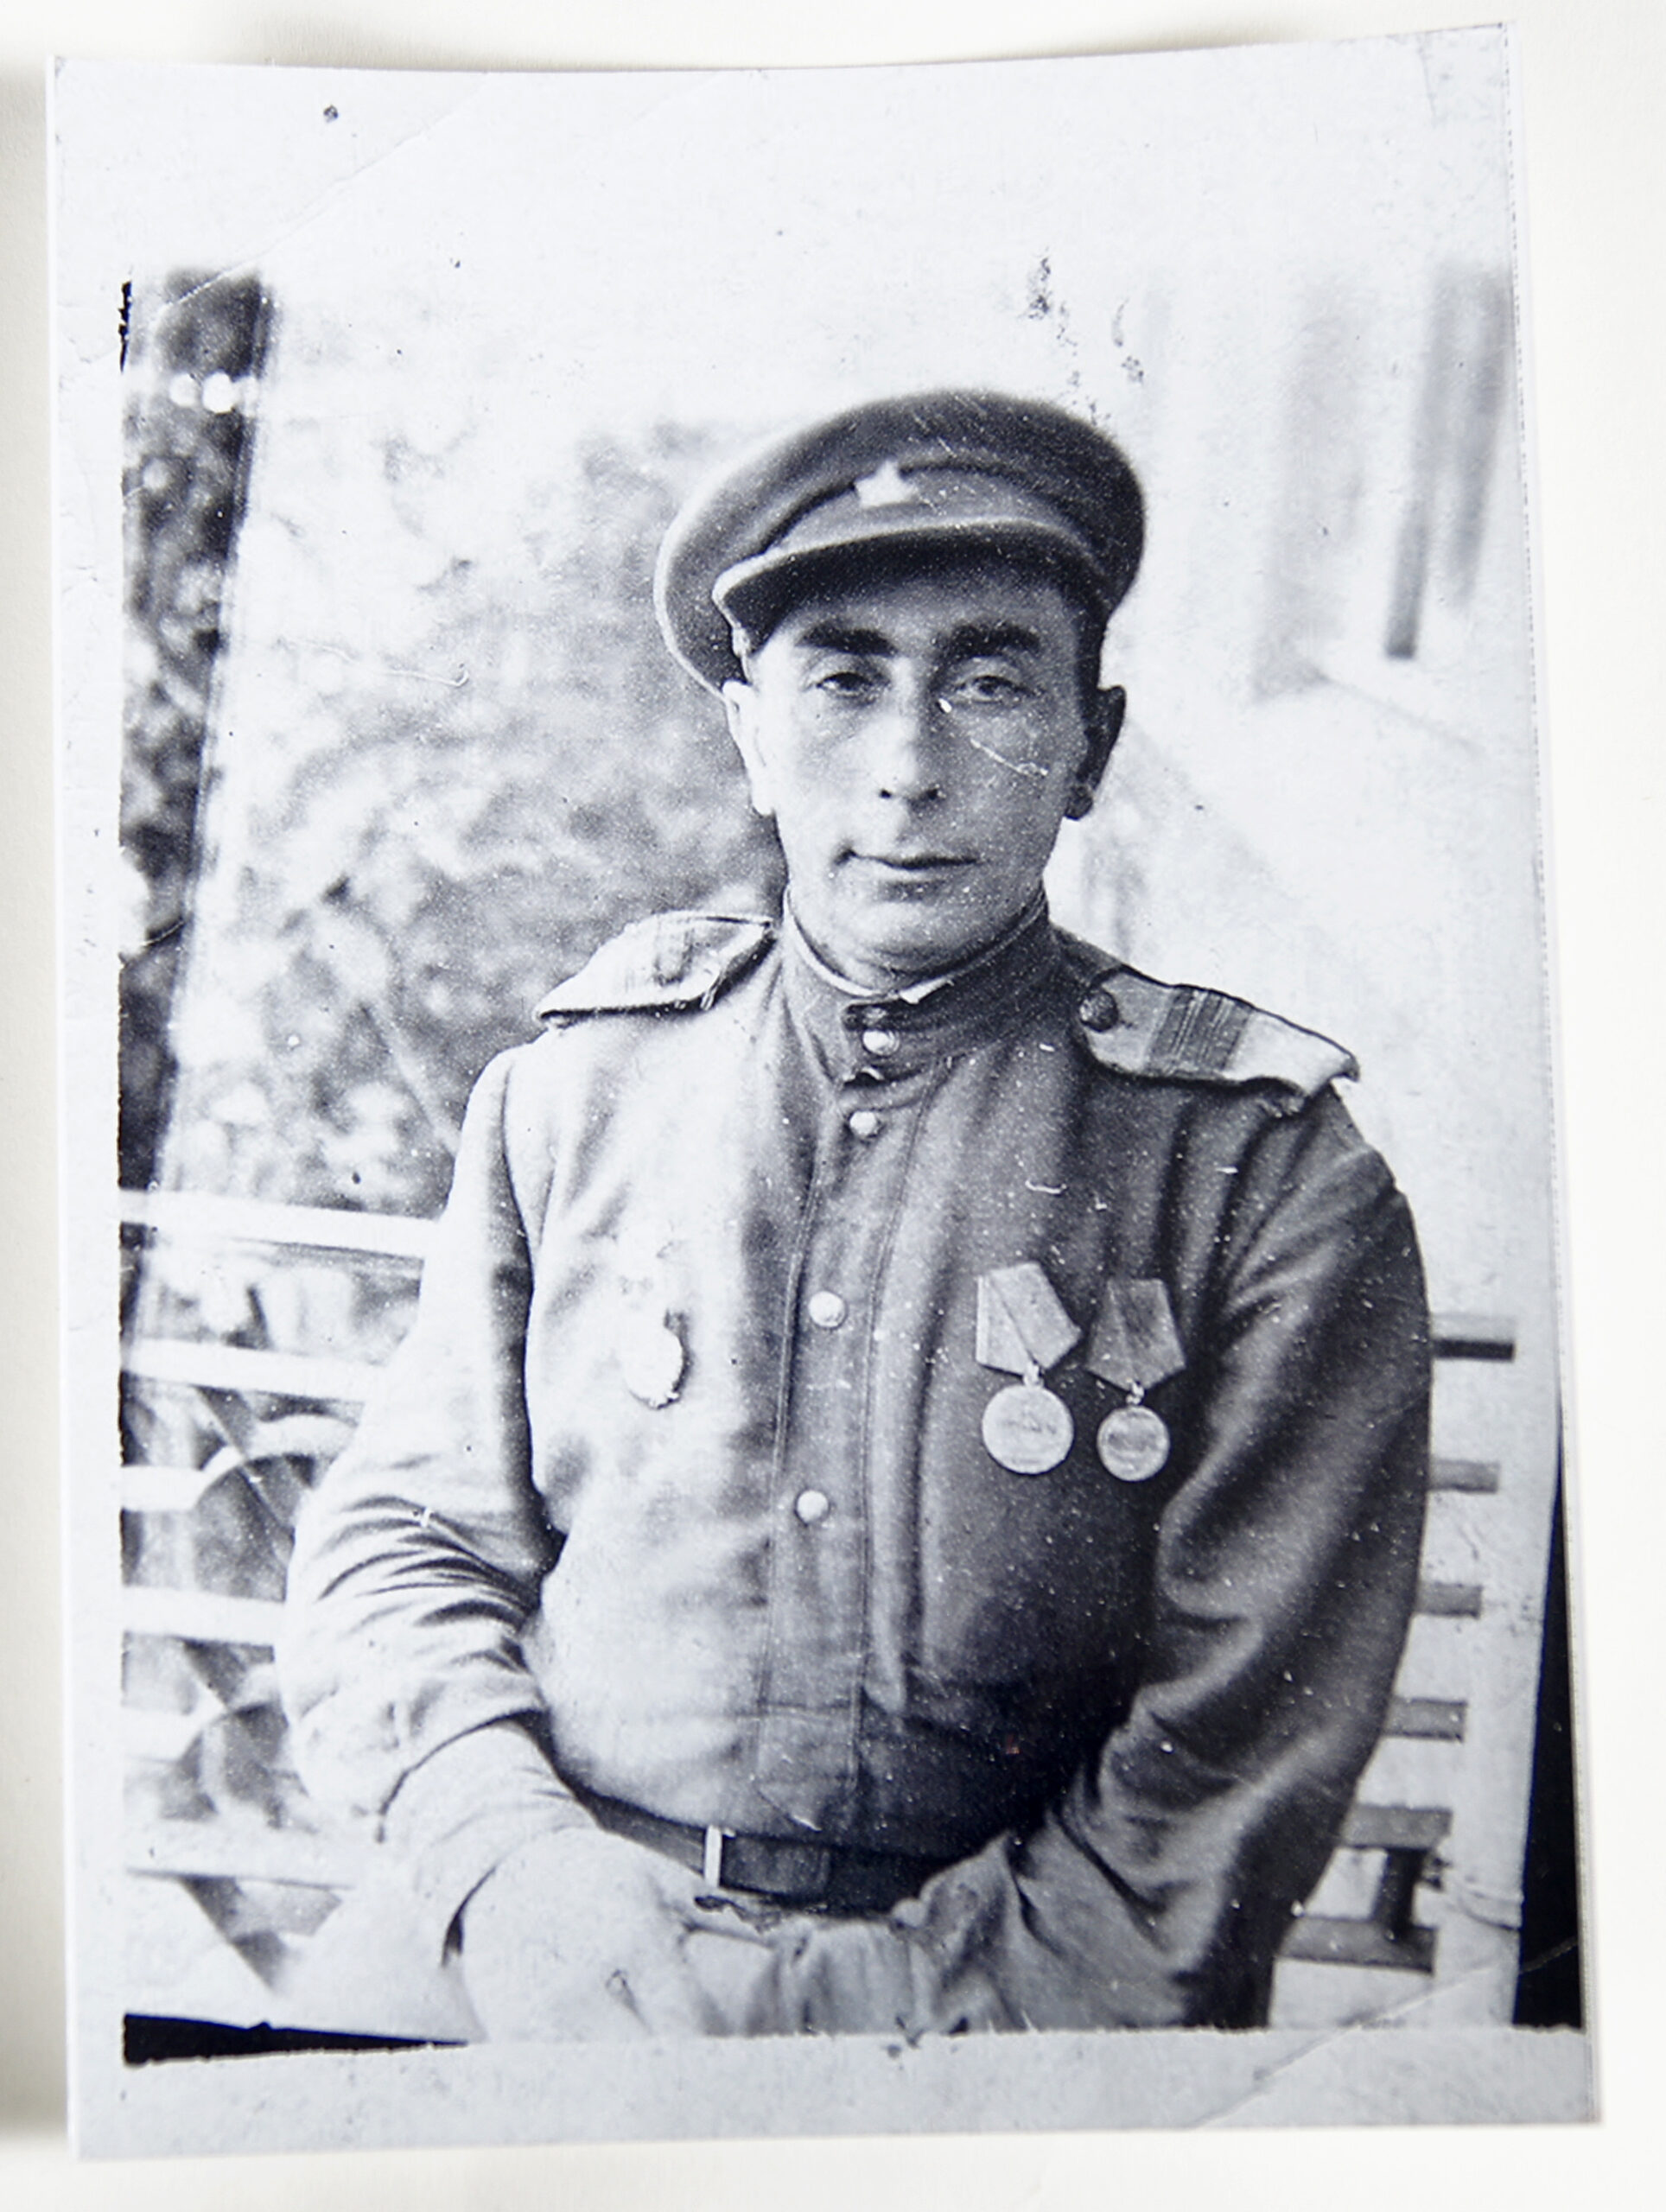 View of black and white photograph. A man in uniform, adorned with three medals, looks at the camera.